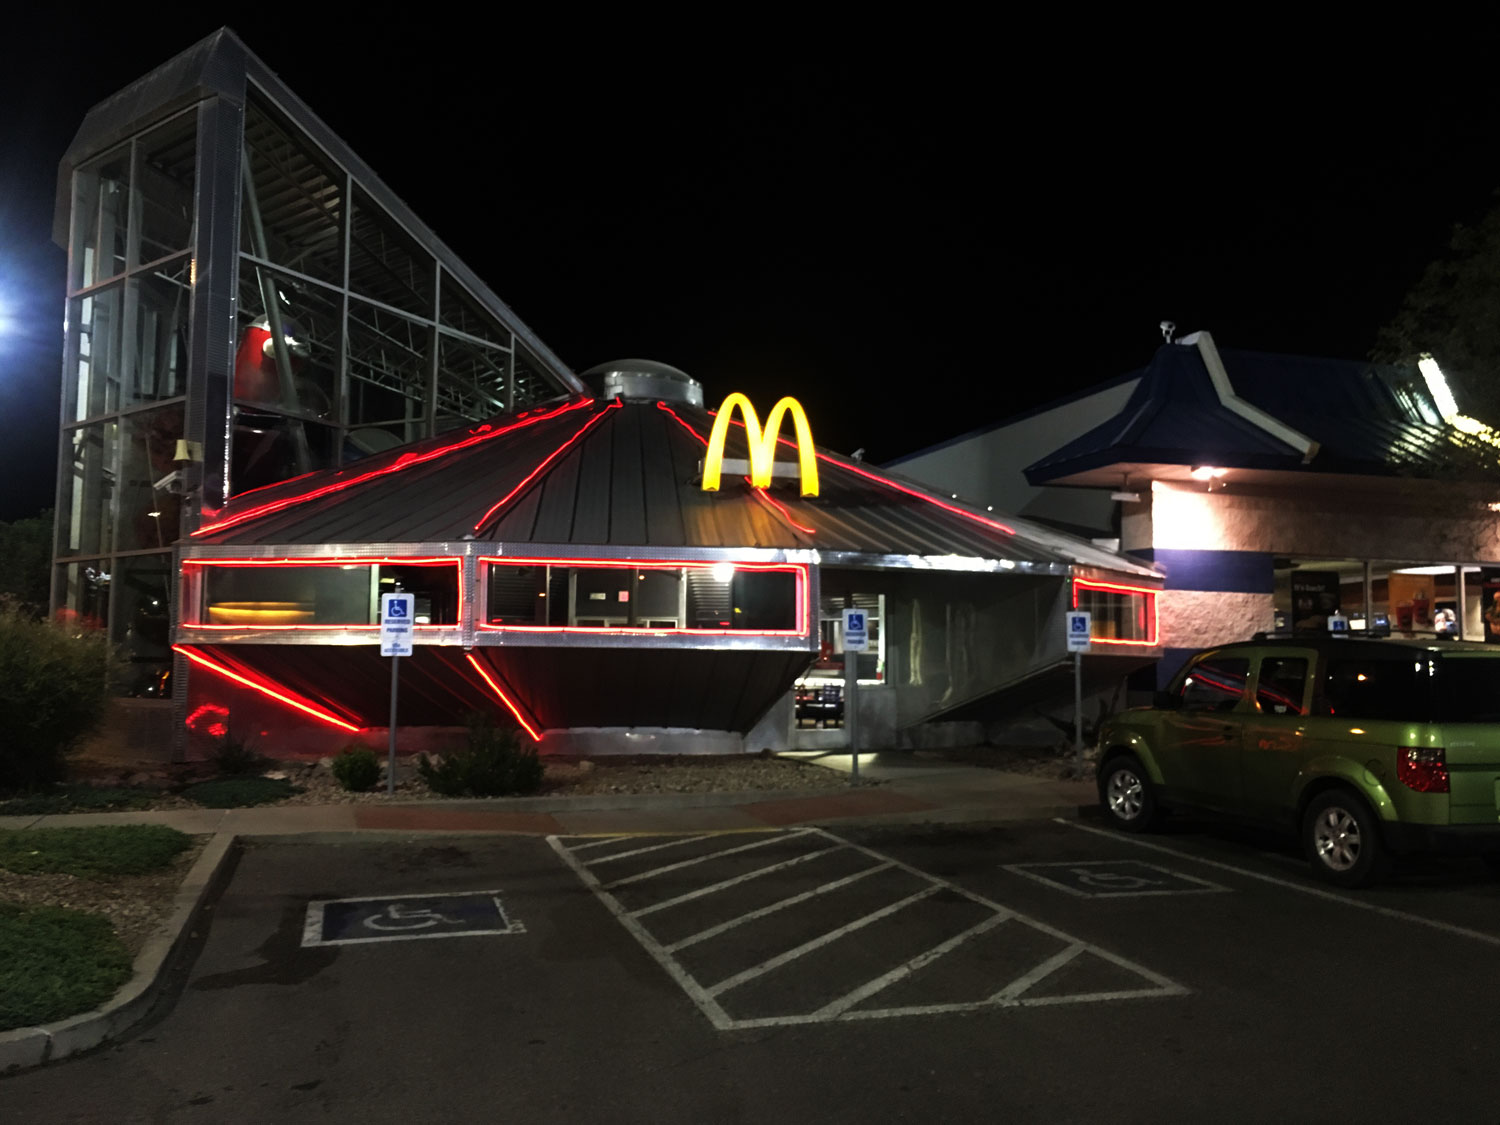 McDonalds shaped like a UFO in Roswell New Mexico